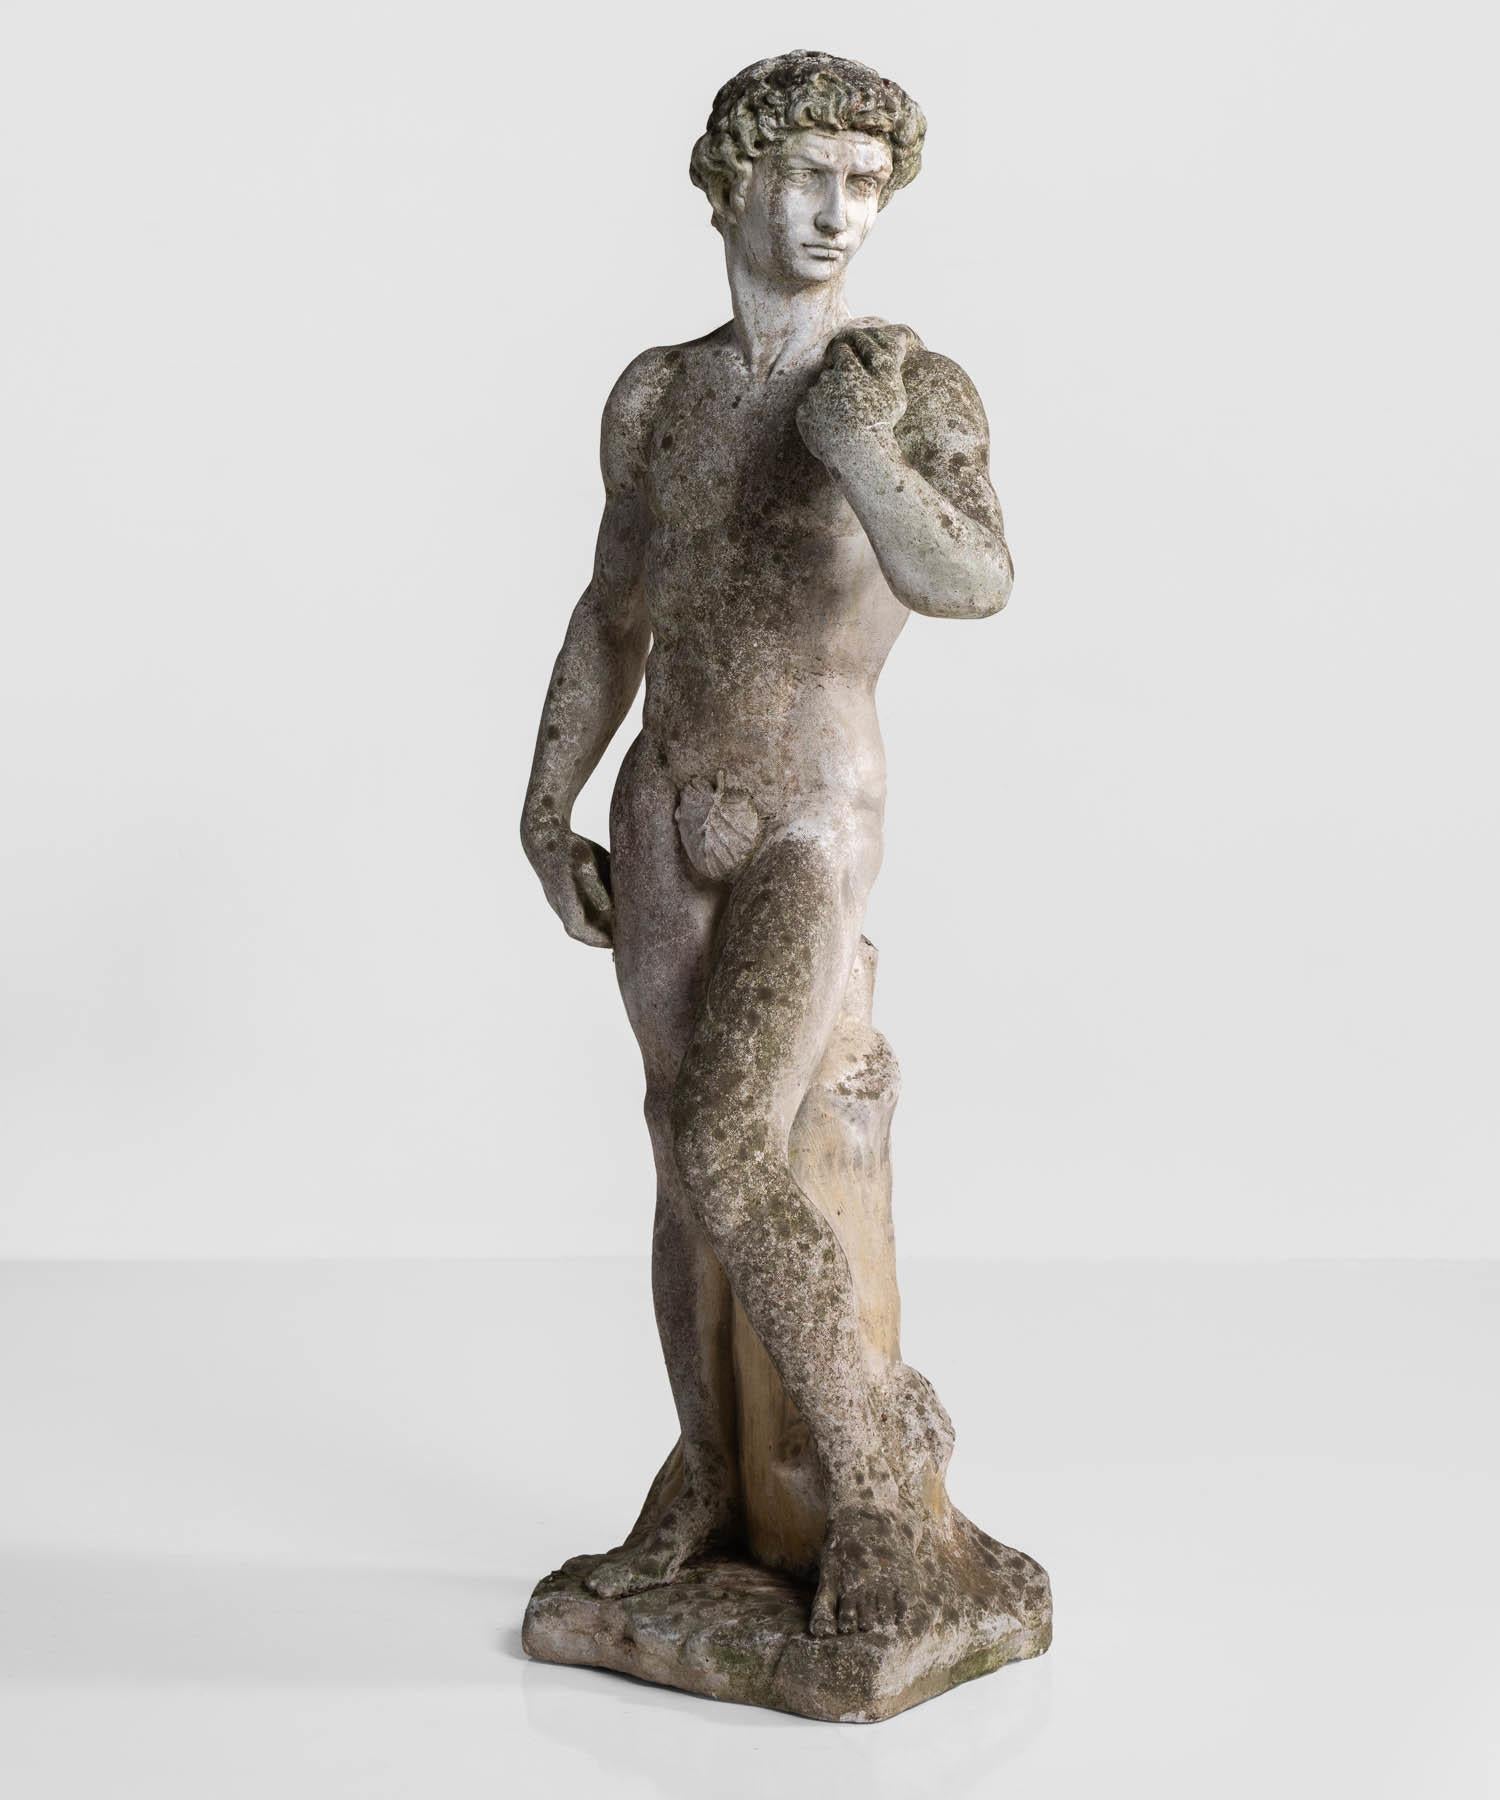 Cast stone statue, France, circa 1900.

With a beautiful patina in the style of Michelangelo's David.